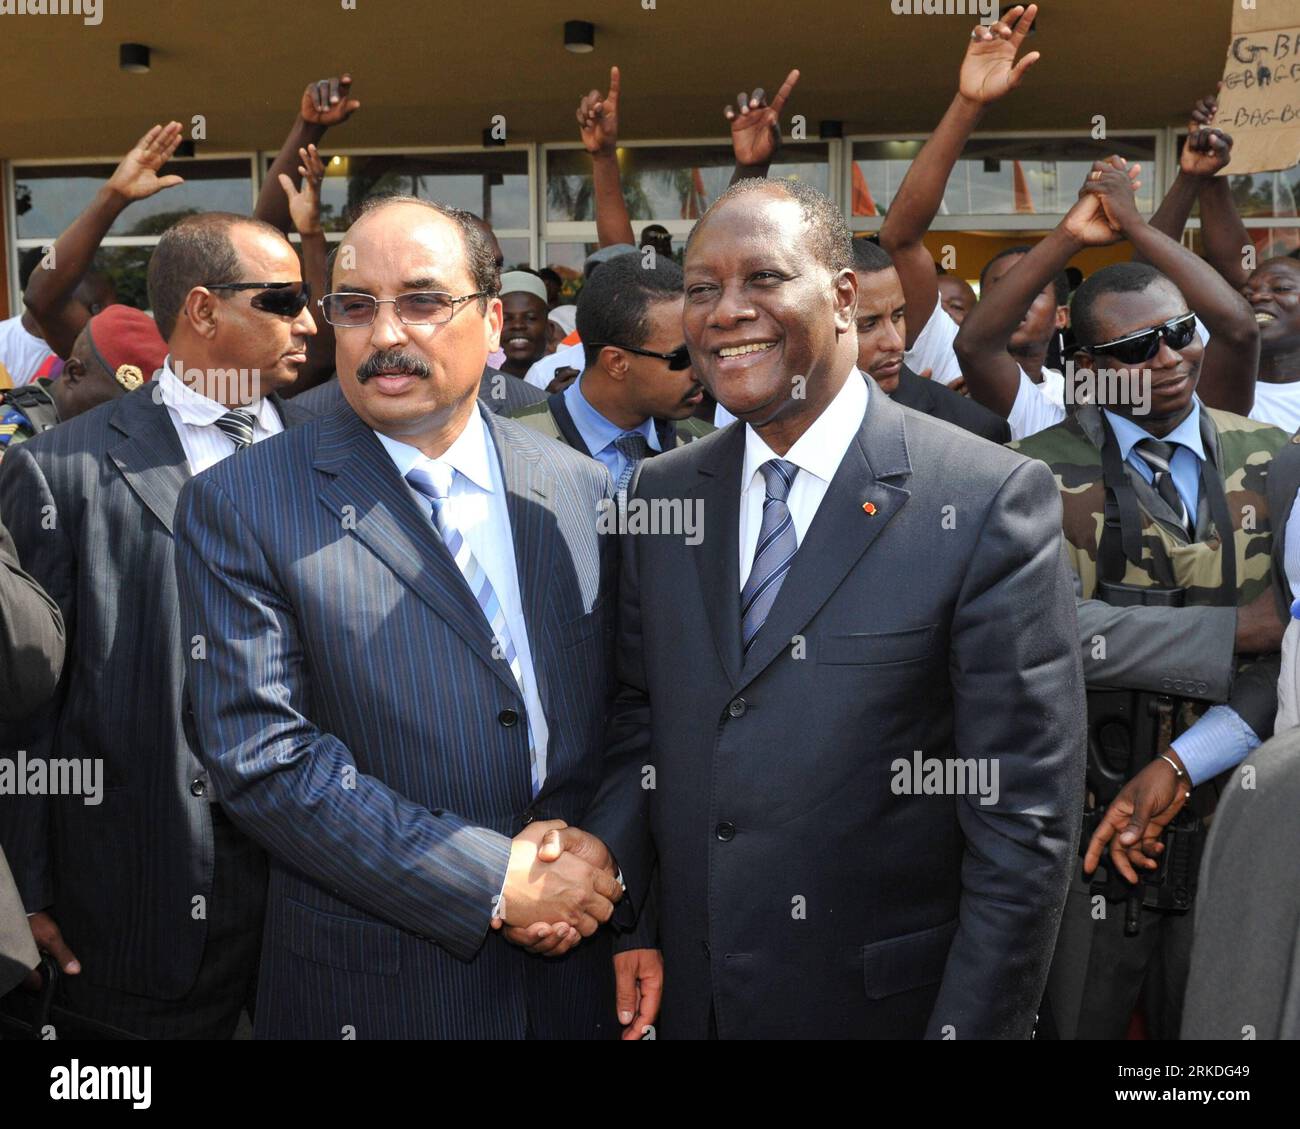 Bildnummer: 54943547  Datum: 22.02.2011  Copyright: imago/Xinhua (110222) -- ABIDJAN, Feb. 22, 2011 (Xinhua) -- Alassane Ouattara (R Front) shakes hands with Mauritanian President Mohamed Ould Abdel Aziz in front of the Golf Hotel in Abidjan, Cote d Ivoire s economic capital, Feb. 22, 2011. The African Union (AU) panel of presidents met AlassanexOuattara at the Golf Hotel where he is still holed up. Both xGbagbox and xOuattarax have claimed the presidency since the election. The international community including the United Nations and the African Union recognizes xOuattarax as the president-el Stock Photo